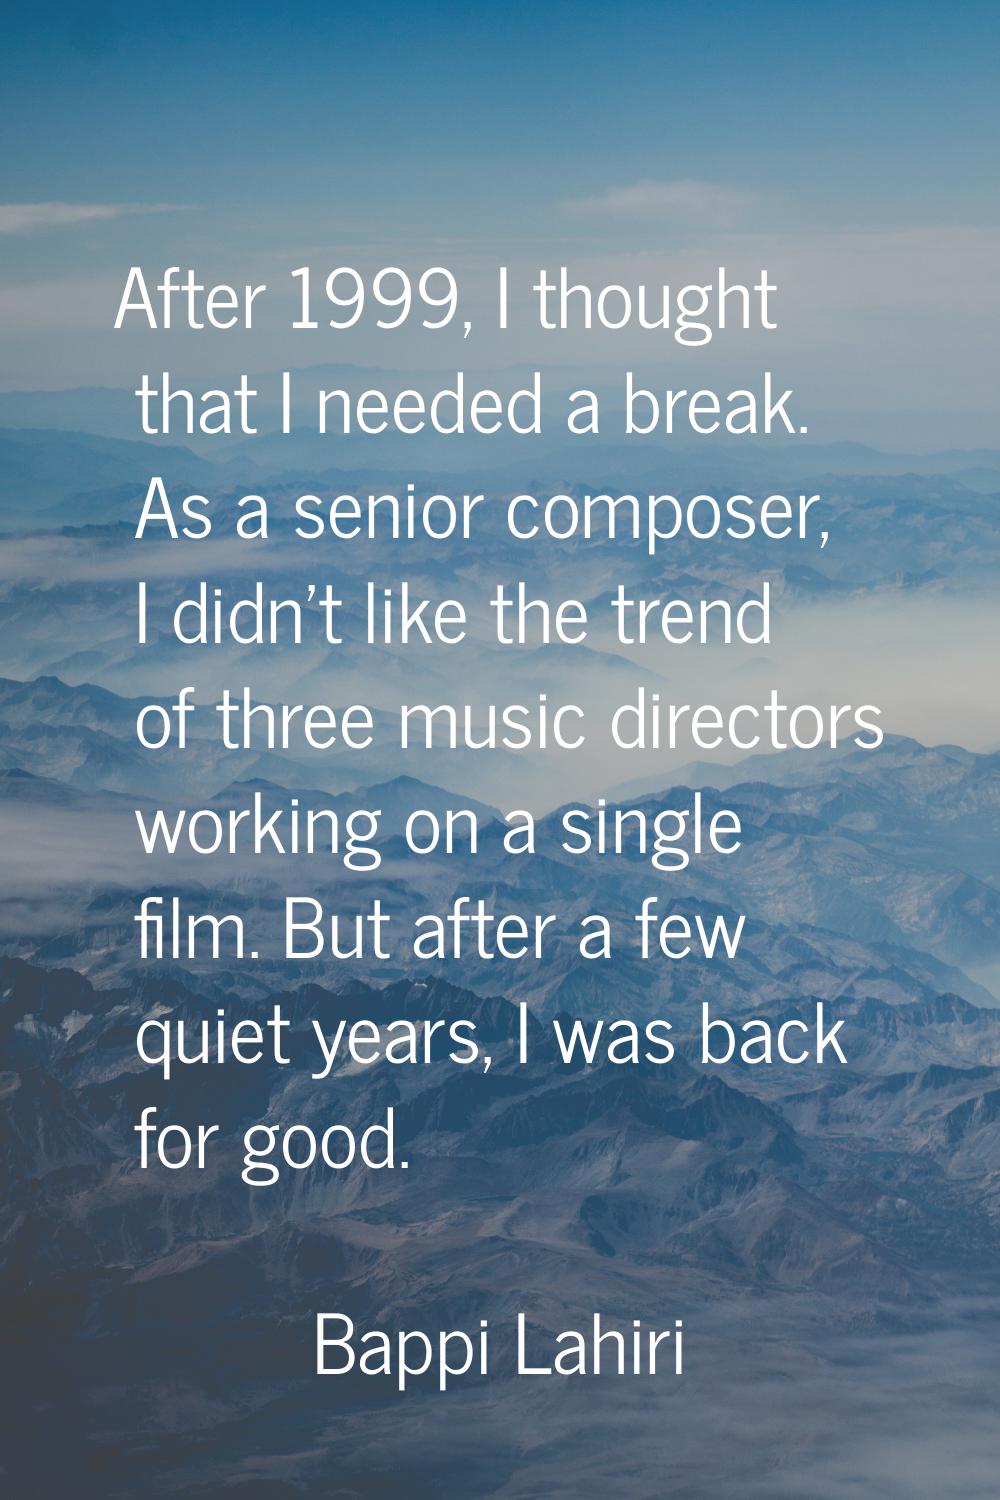 After 1999, I thought that I needed a break. As a senior composer, I didn't like the trend of three